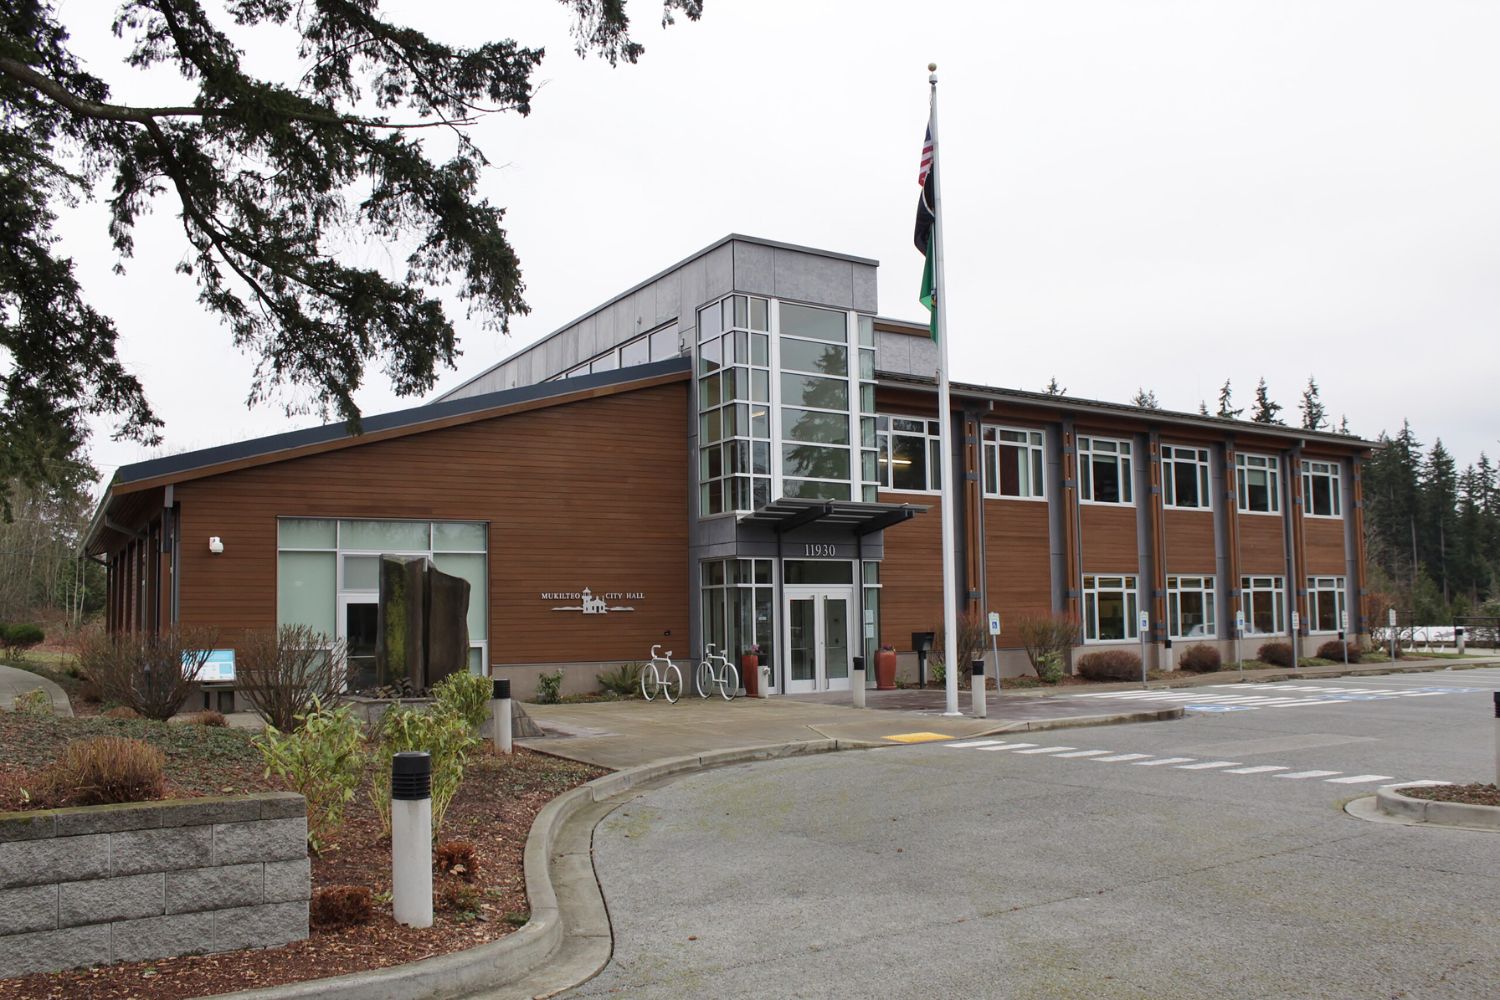 An image of the Mukilteo City Hall - photo by SounderBruce for Wikimedia Commons.